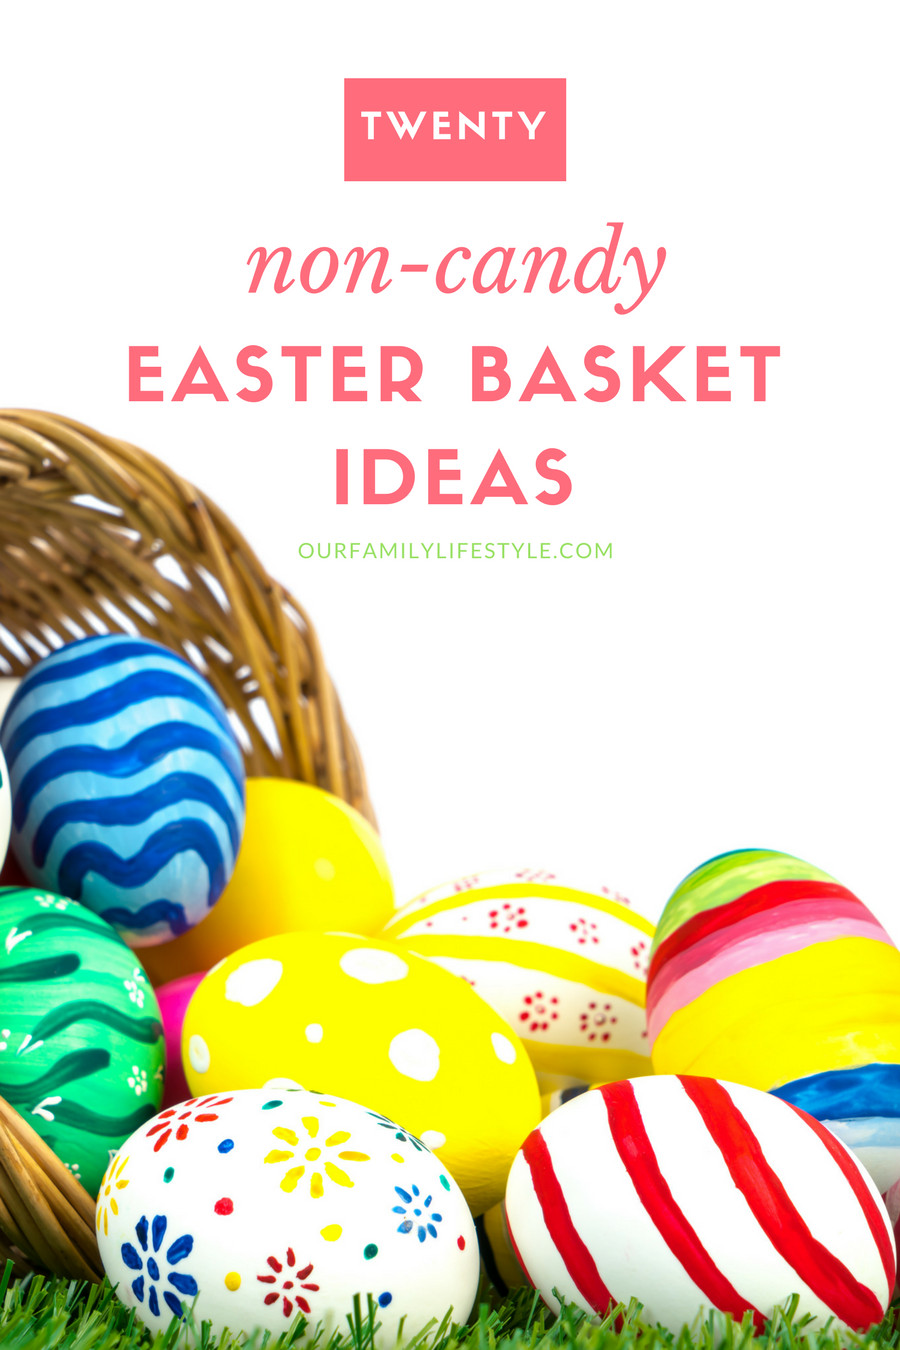 Non Candy Easter Basket Ideas
 20 Non Candy Easter Basket Ideas for Kids